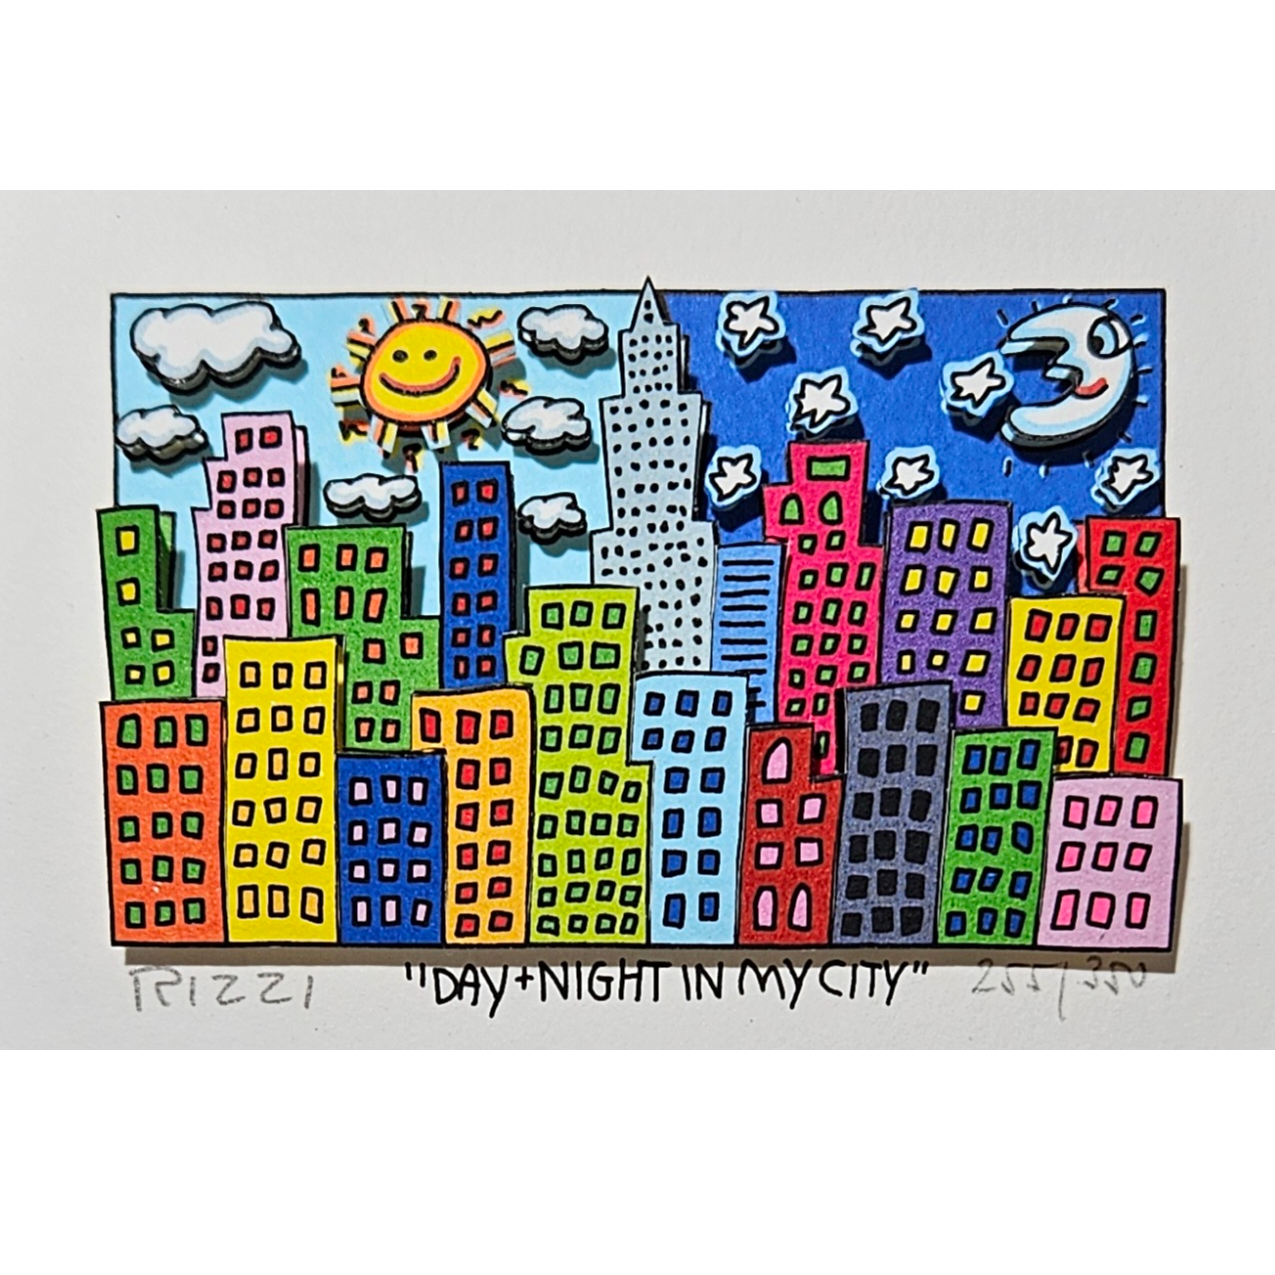 James Rizzi - Day + Night in My City (2013)